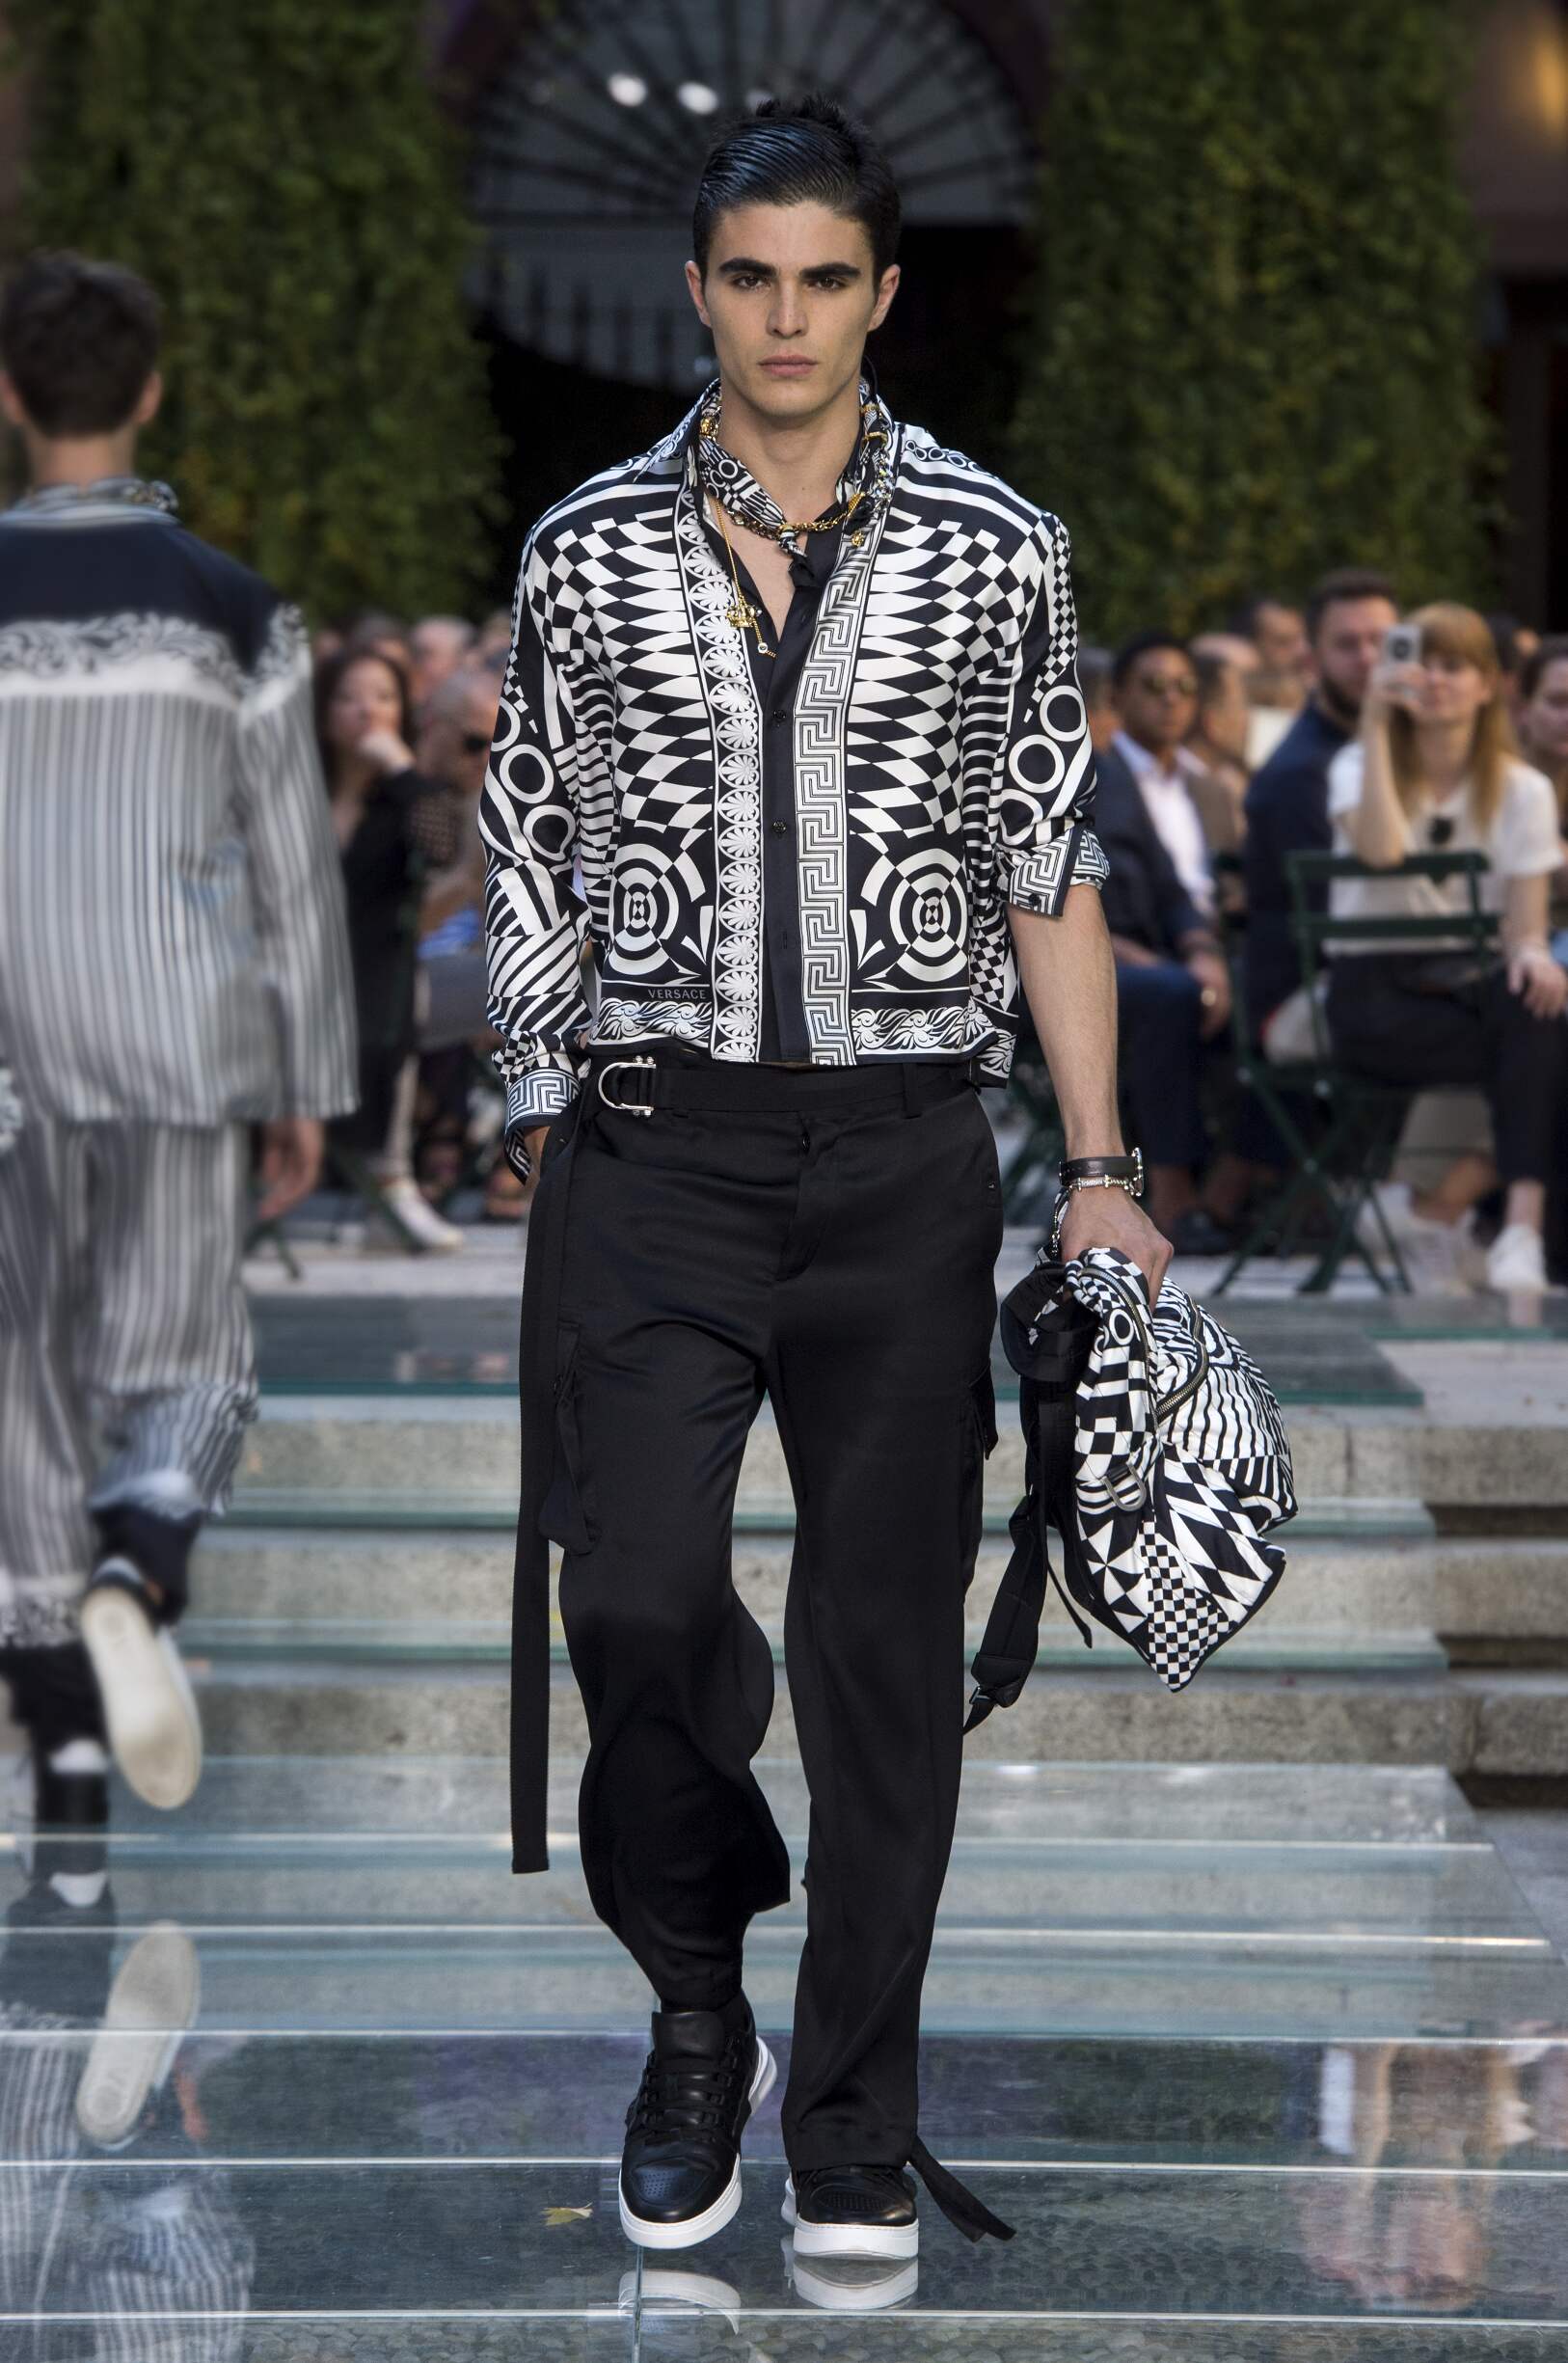 VERSACE SPRING SUMMER 2018 MEN’S COLLECTION | The Skinny Beep